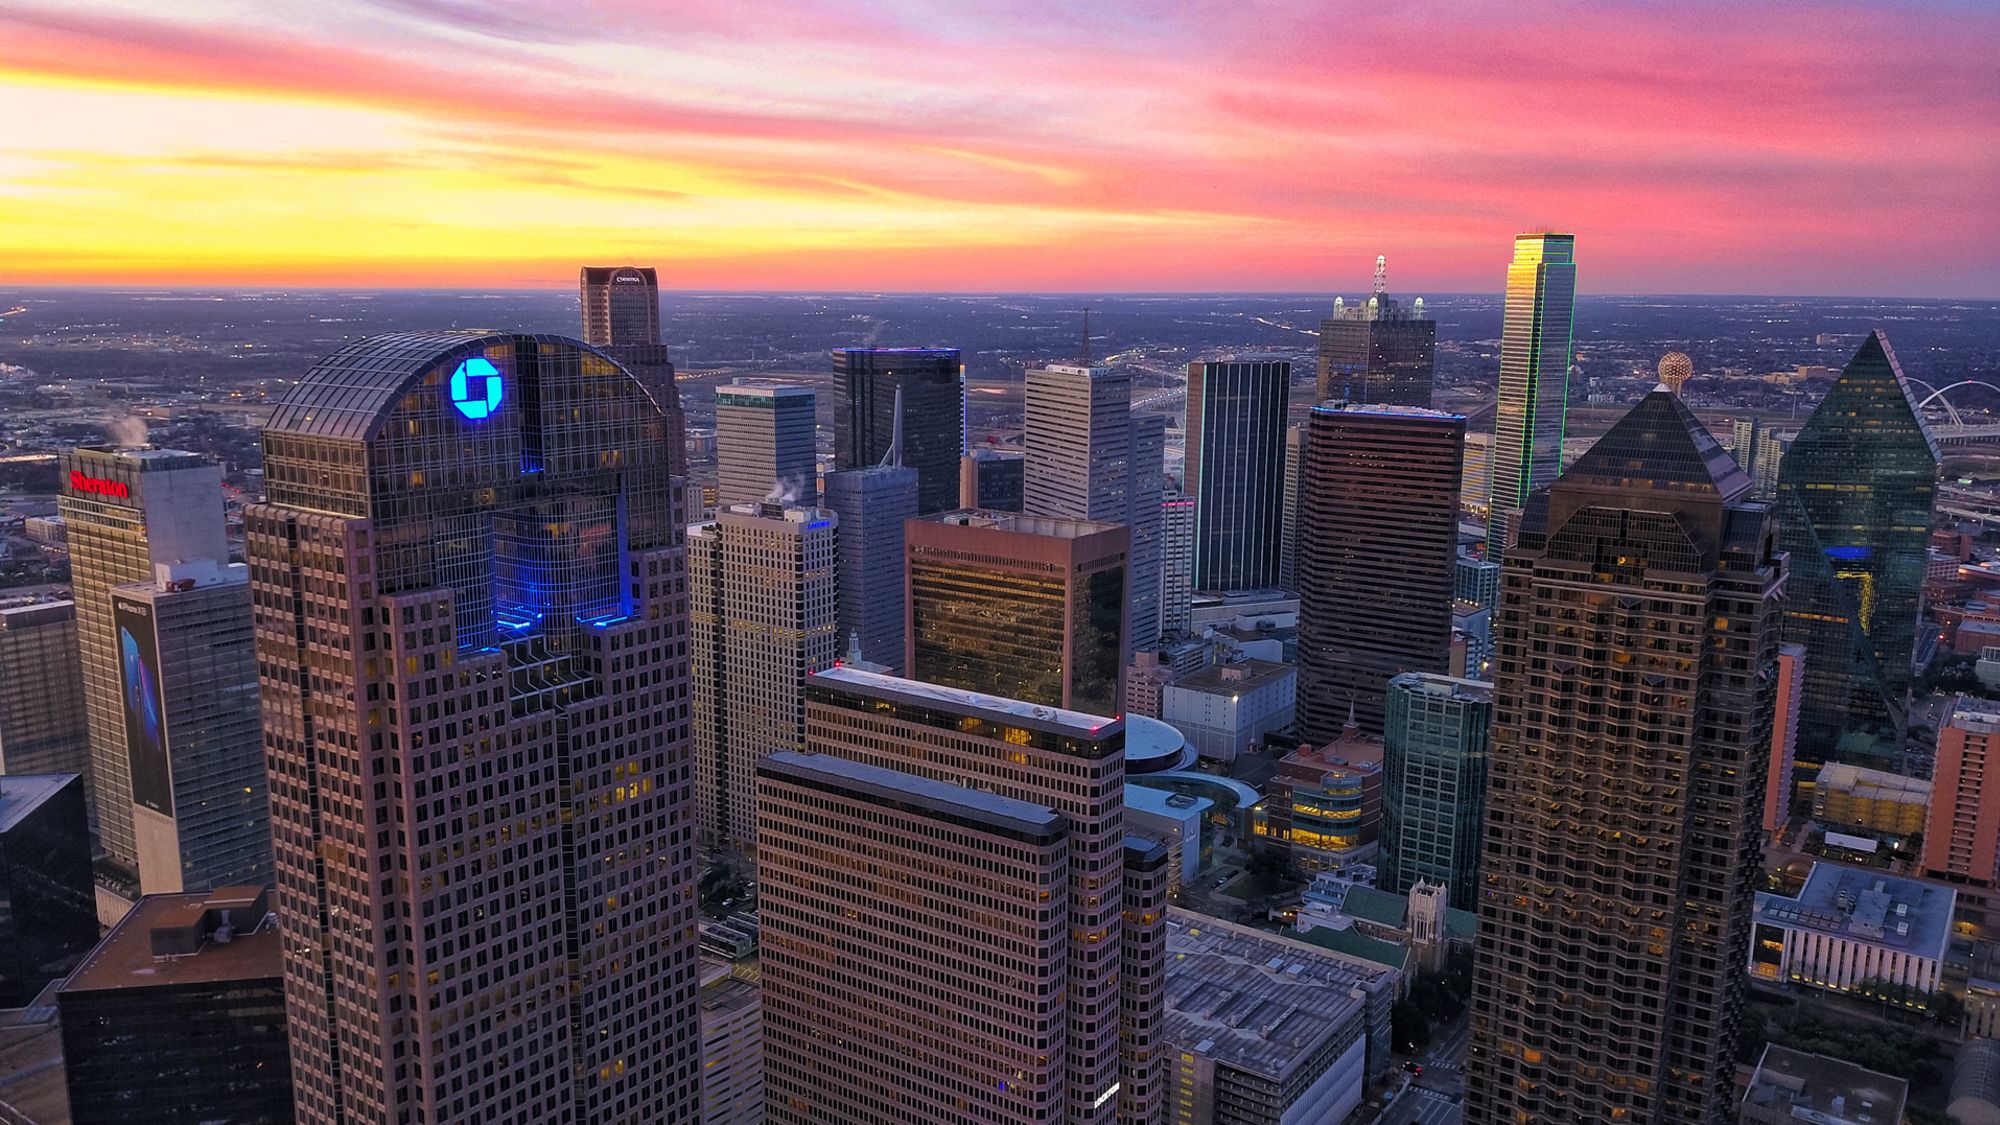 City view of Dallas at sunset.